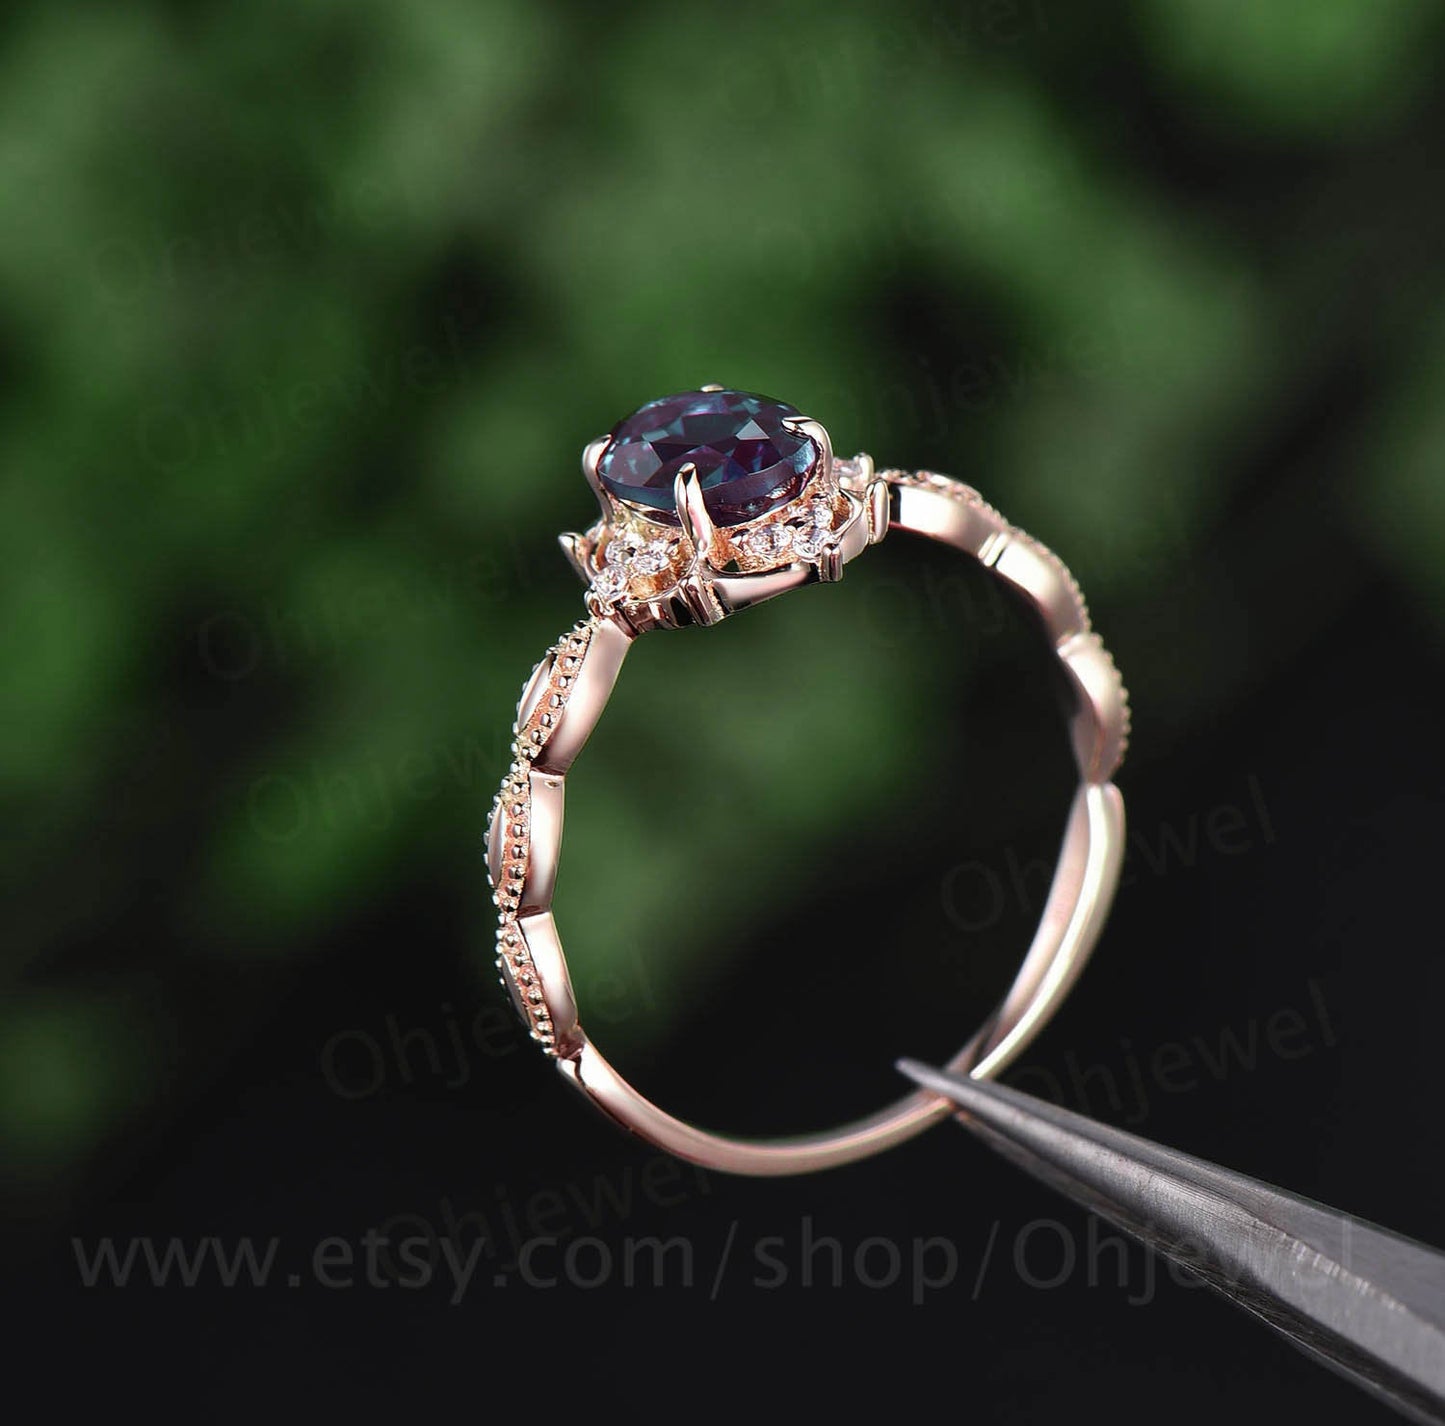 Oval alexandrite ring vintage color change alexandrite engagement ring rose gold moissanite ring for women jewelry unique bridal ring gift